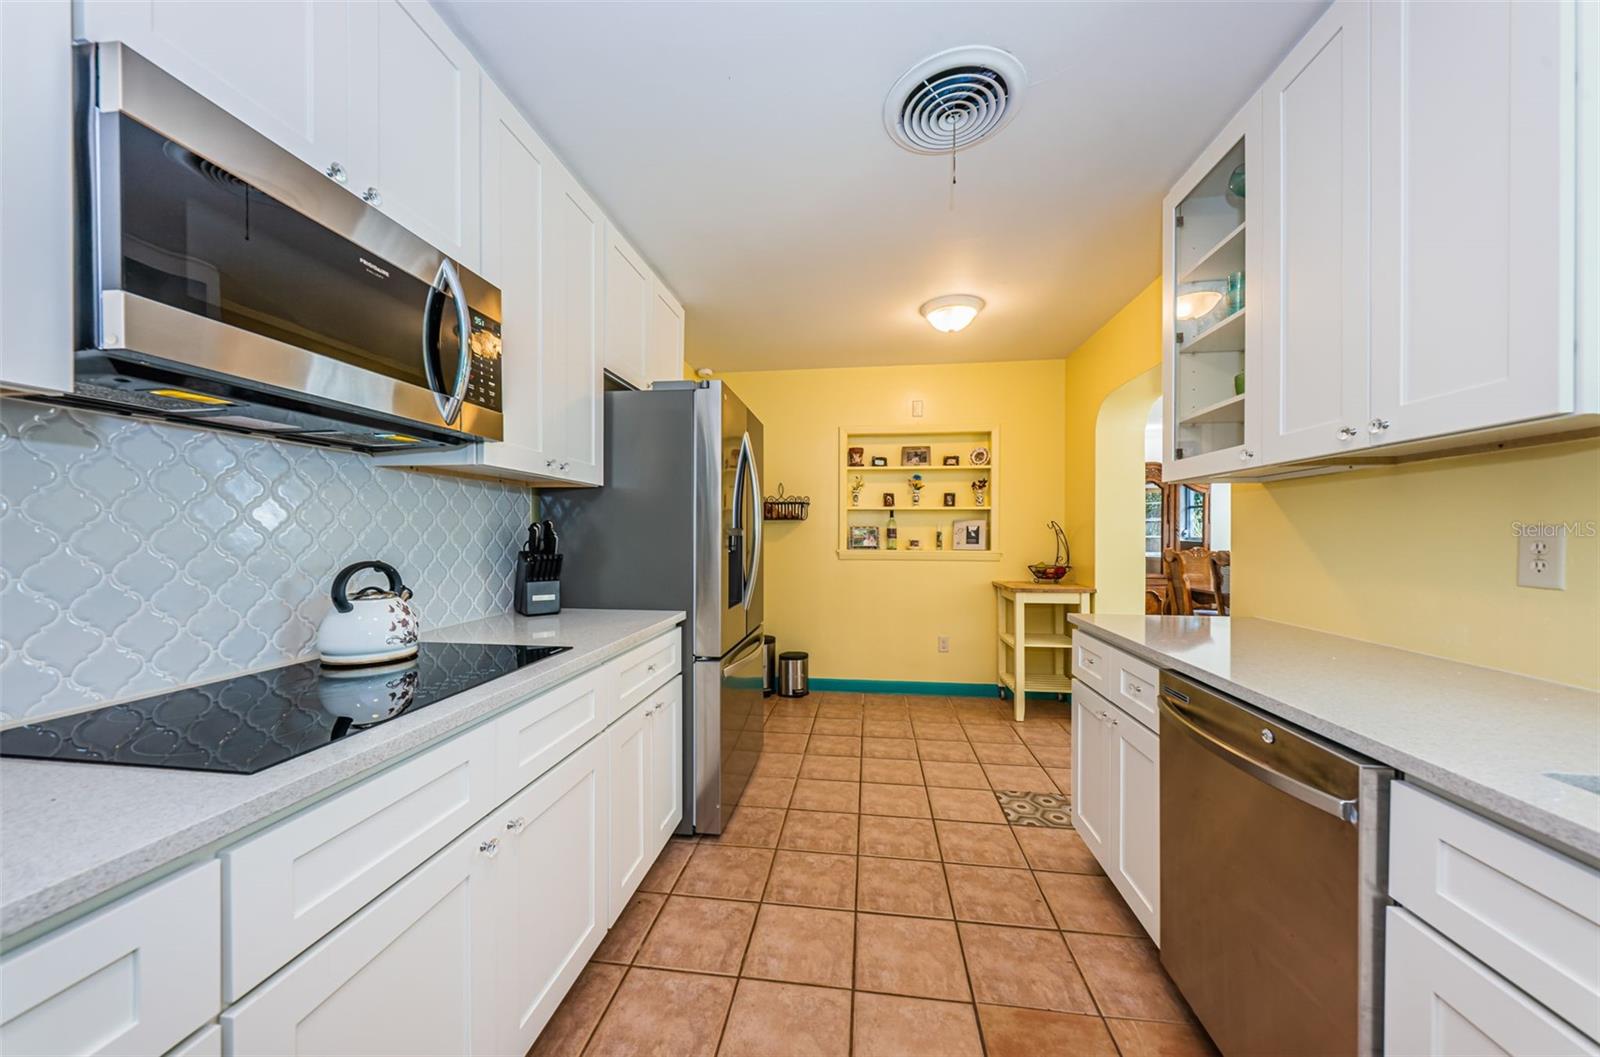 Fully remodeled kitchen with two walls of tall cabinetry and stainless steel appliances.